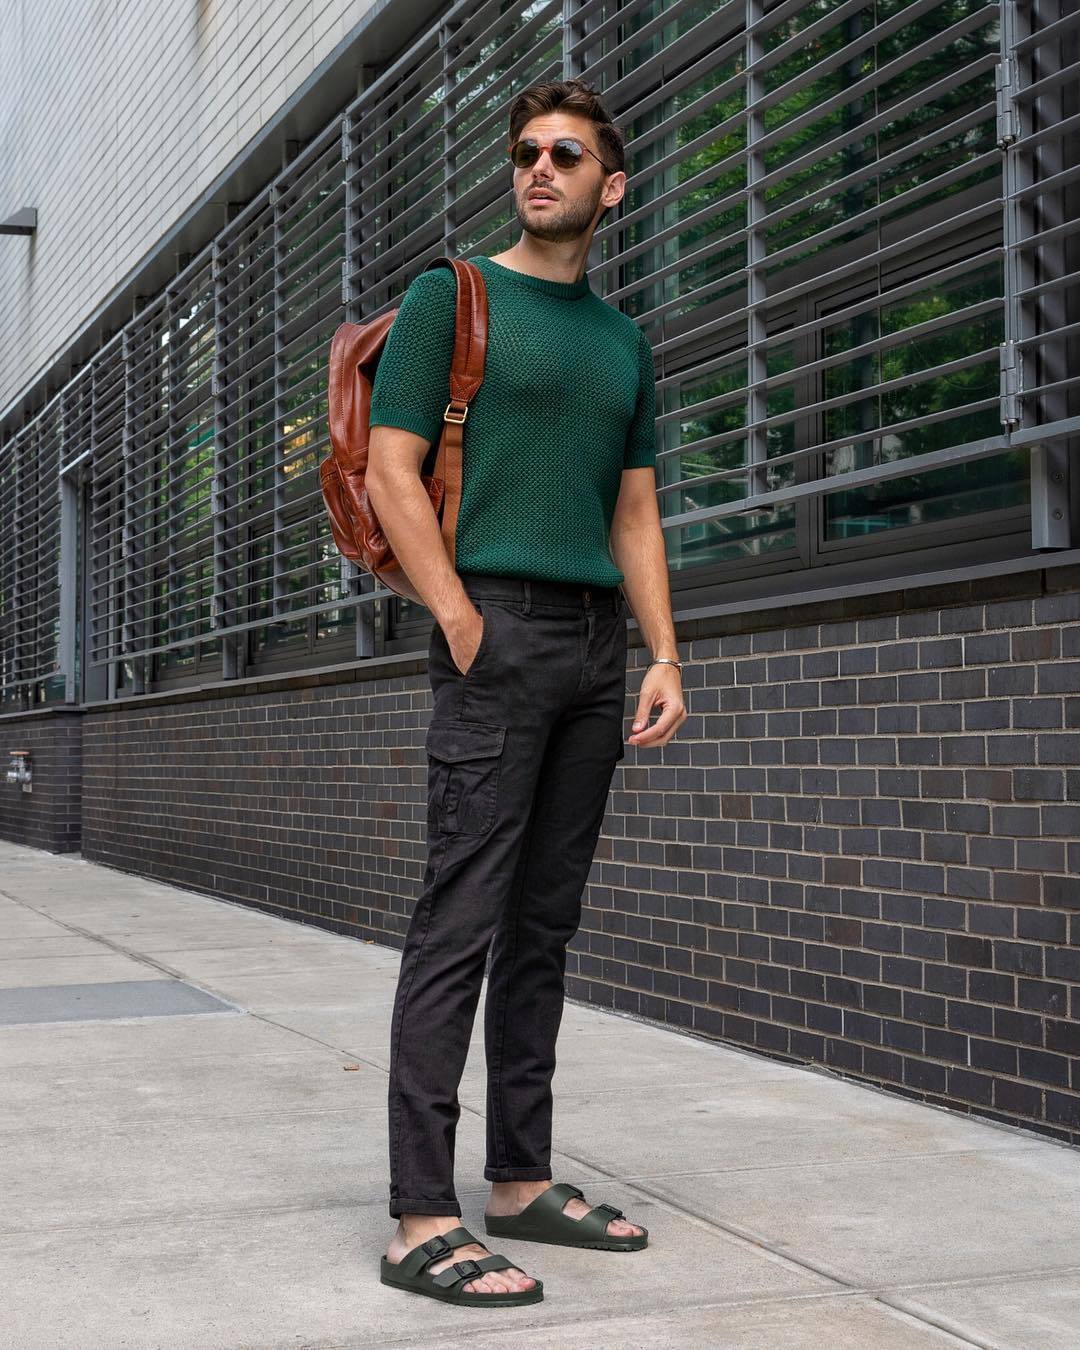 Black Cargo Pants with Dark Green Shirt Outfits (4 ideas & outfits) |  Lookastic